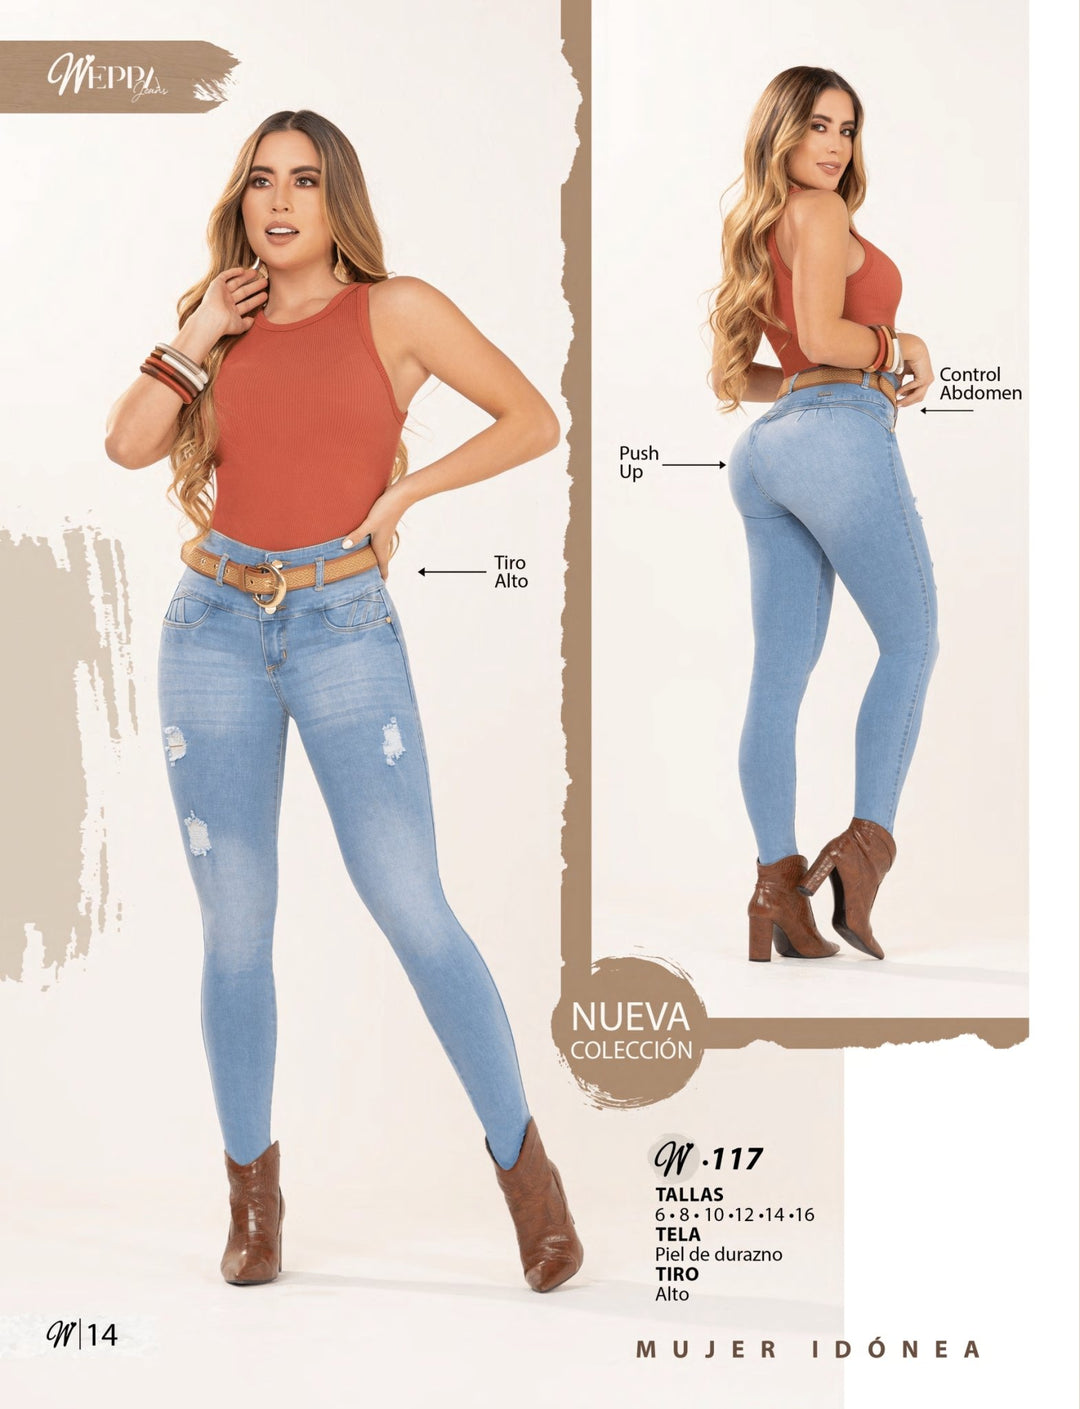 W-117 100% Authentic Colombian Push Up Jeans by Weppa Jeans - JDColFashion